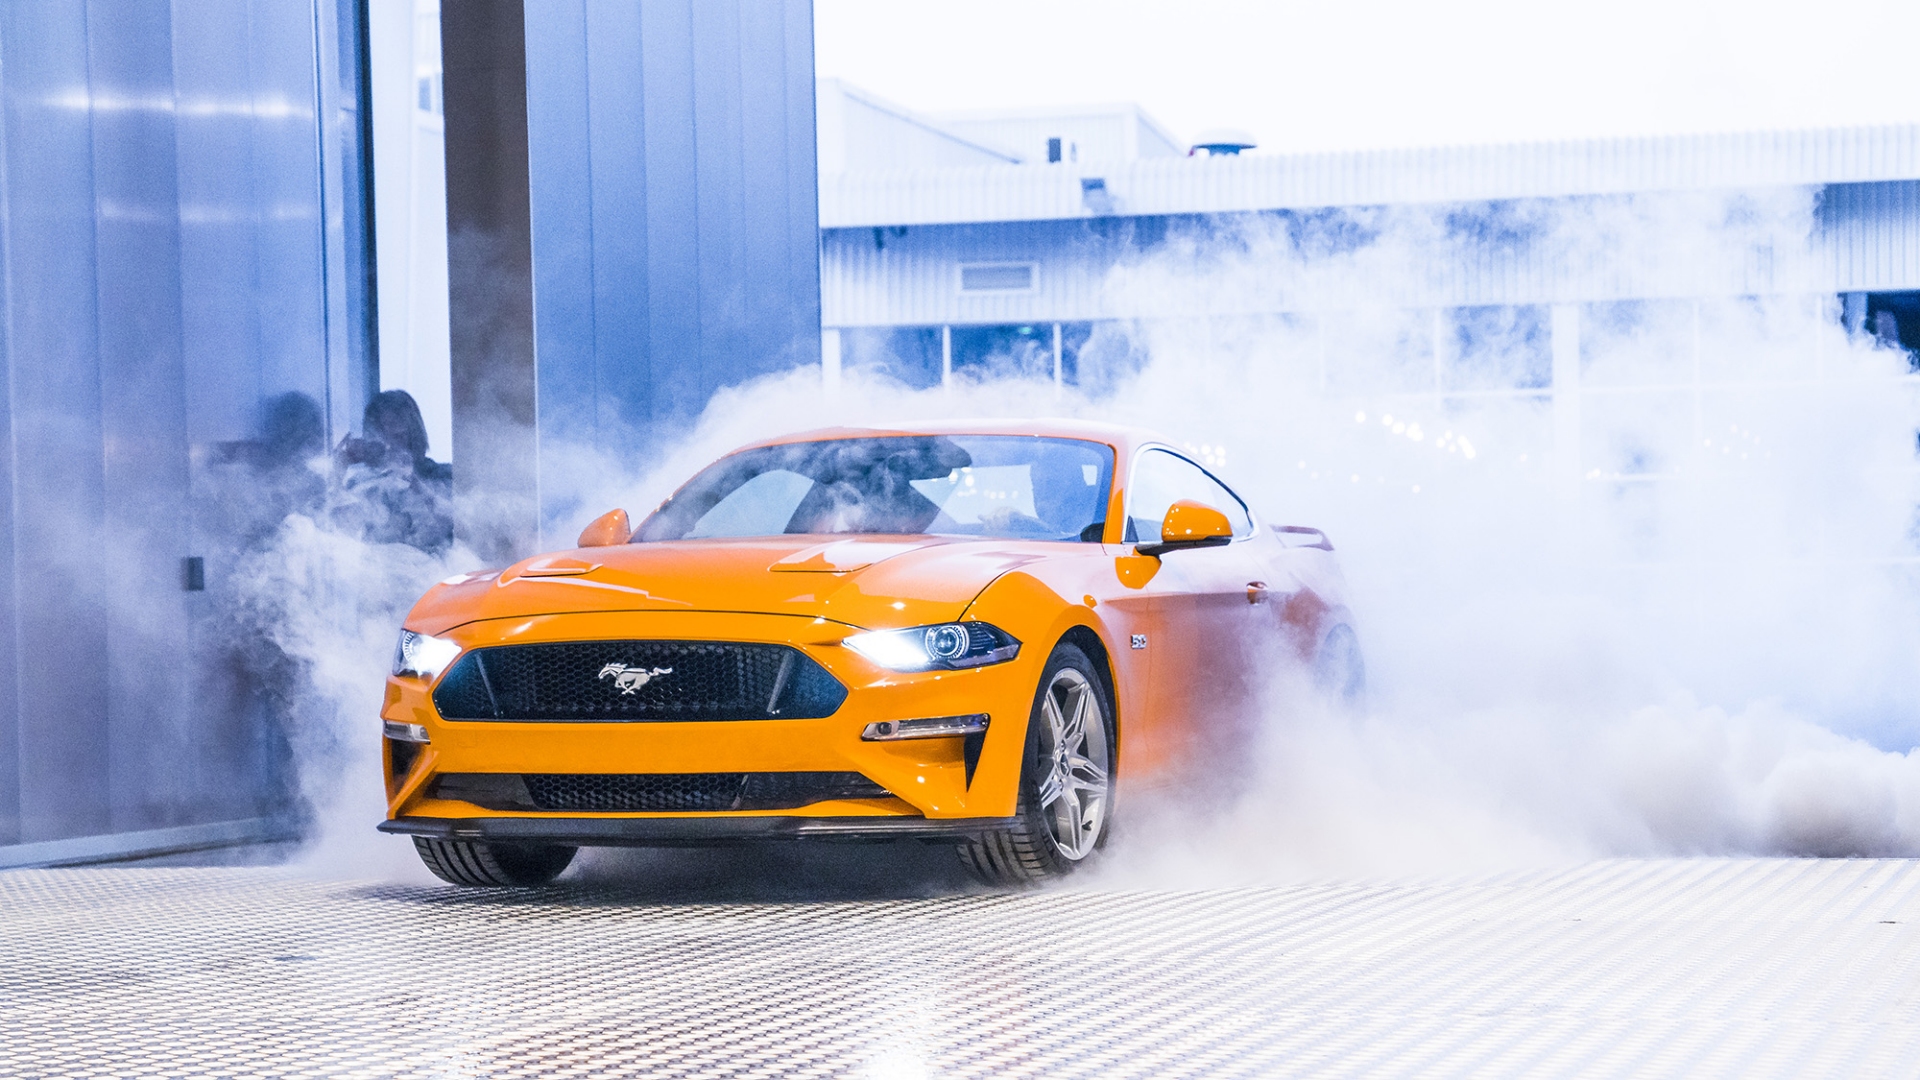 2018 Ford Mustang - Orange Exterior - Front Side View - Launch Event